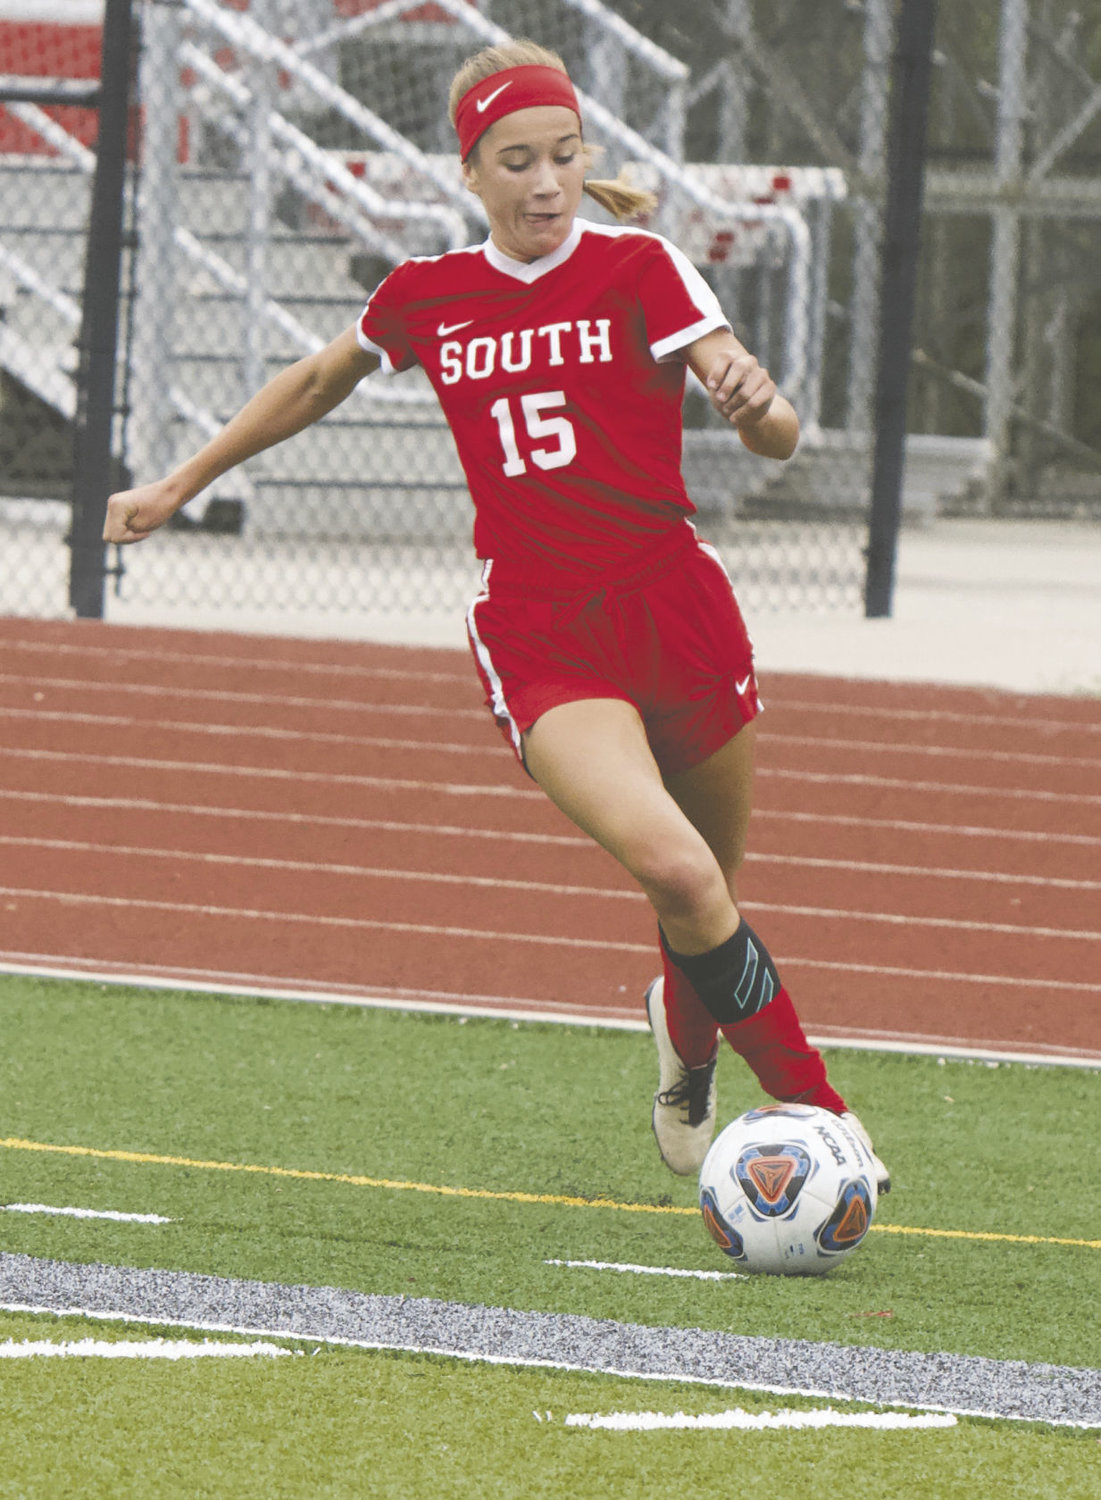 Marissa Craig makes a move with the ball in Southmont's 5-1 win over South Vermillion on Thursday.